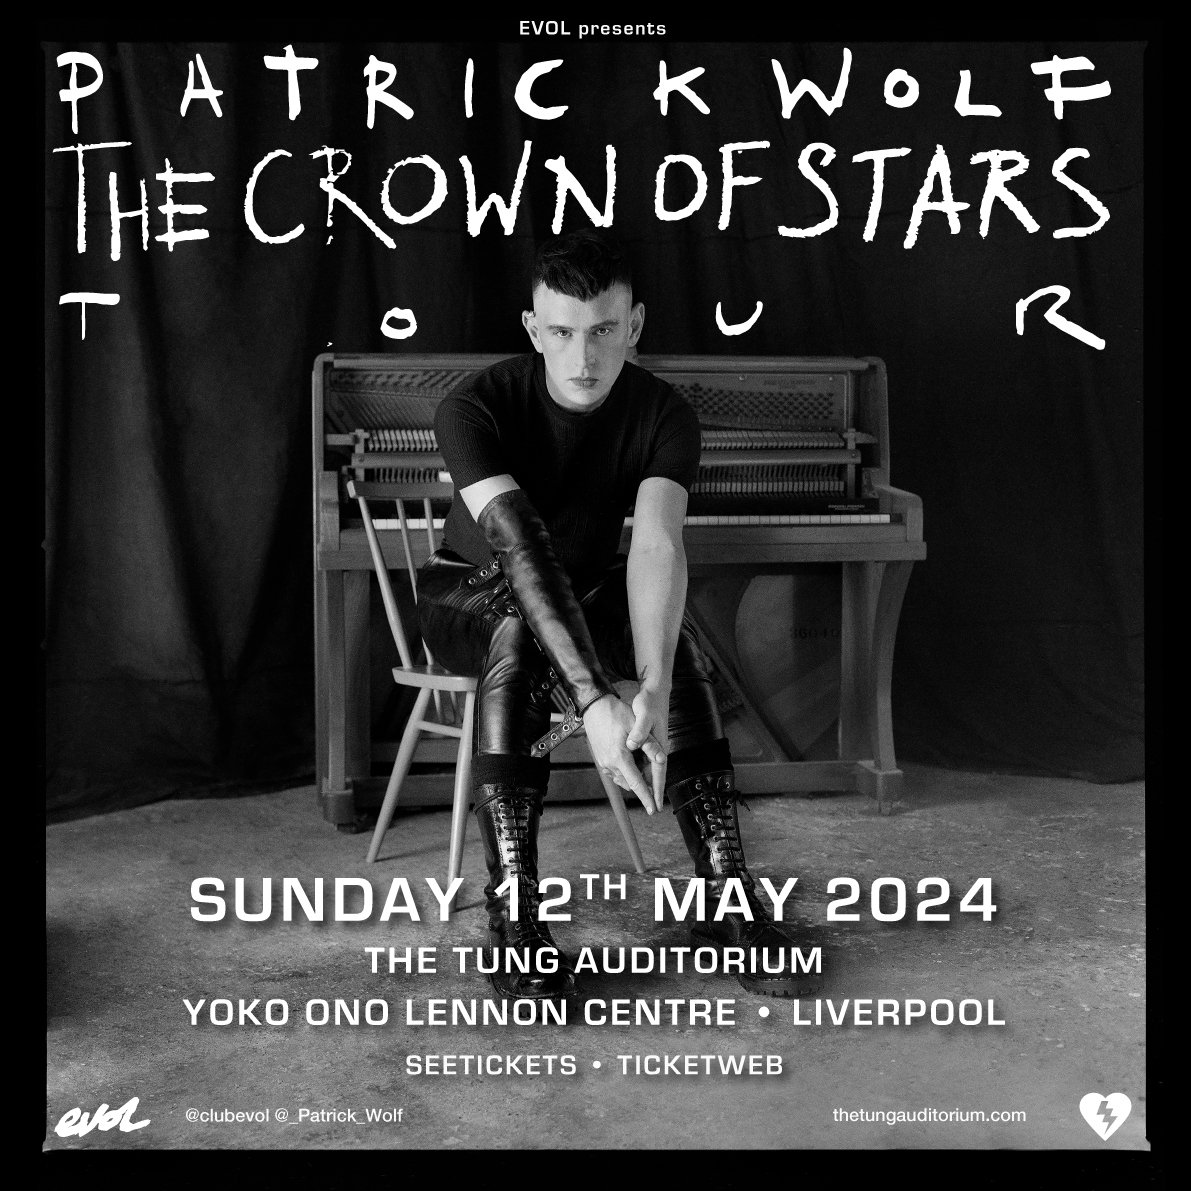 Proud that Liverpool hosts 𝐓𝐇𝐄 𝐎𝐍𝐋𝐘 𝐔𝐊 𝐒𝐇𝐎𝐖 of acclaimed & adored artiste @_PATRICK_WOLF's 'The Crown Of Stars' Tour, Sunday May 12th at @TungAuditorium, Yoko Ono Lennon Centre. Tickets are flying. Get them via @seetickets NOW‼️ seetickets.com/event/patrick-…